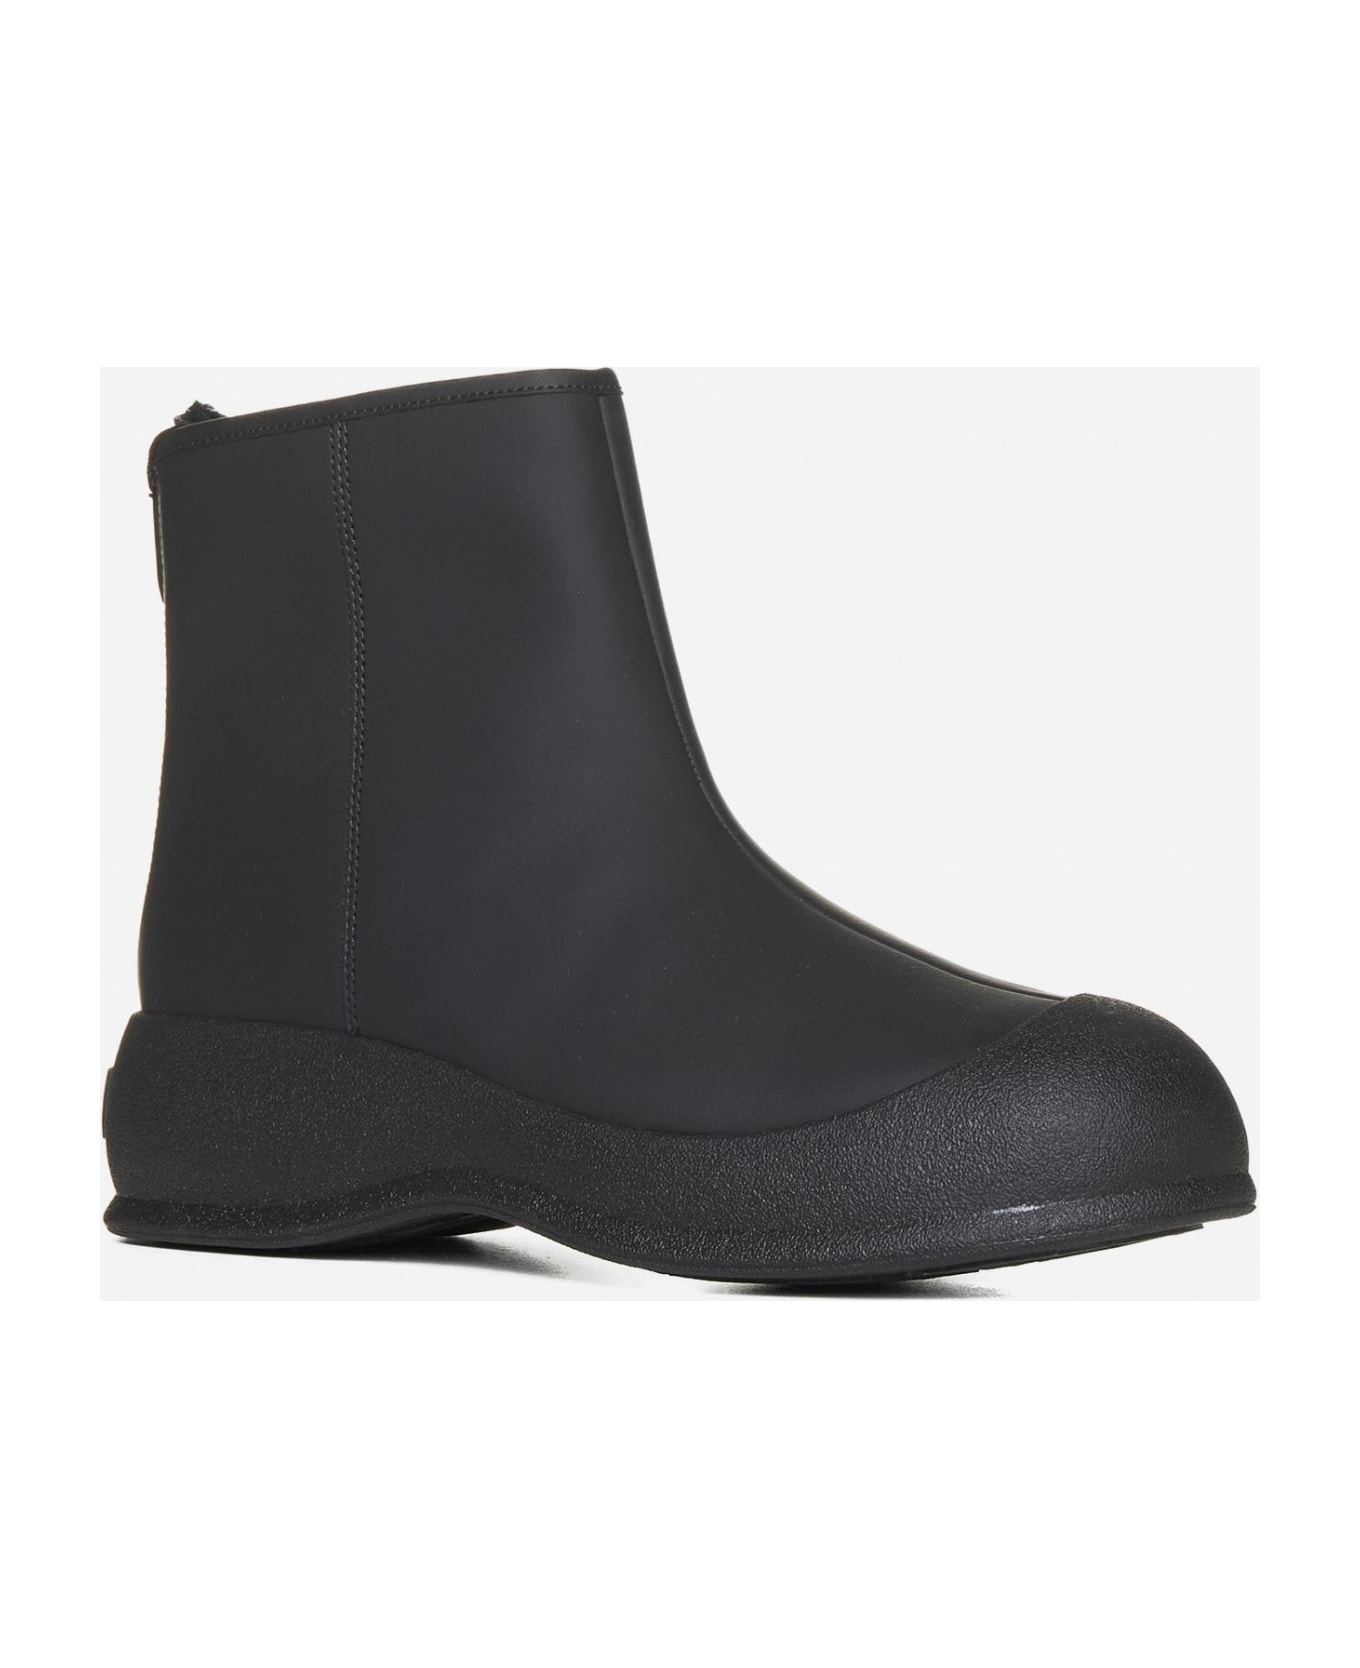 Bally Carsey Coated Leather Ankle Boots - Black ブーツ